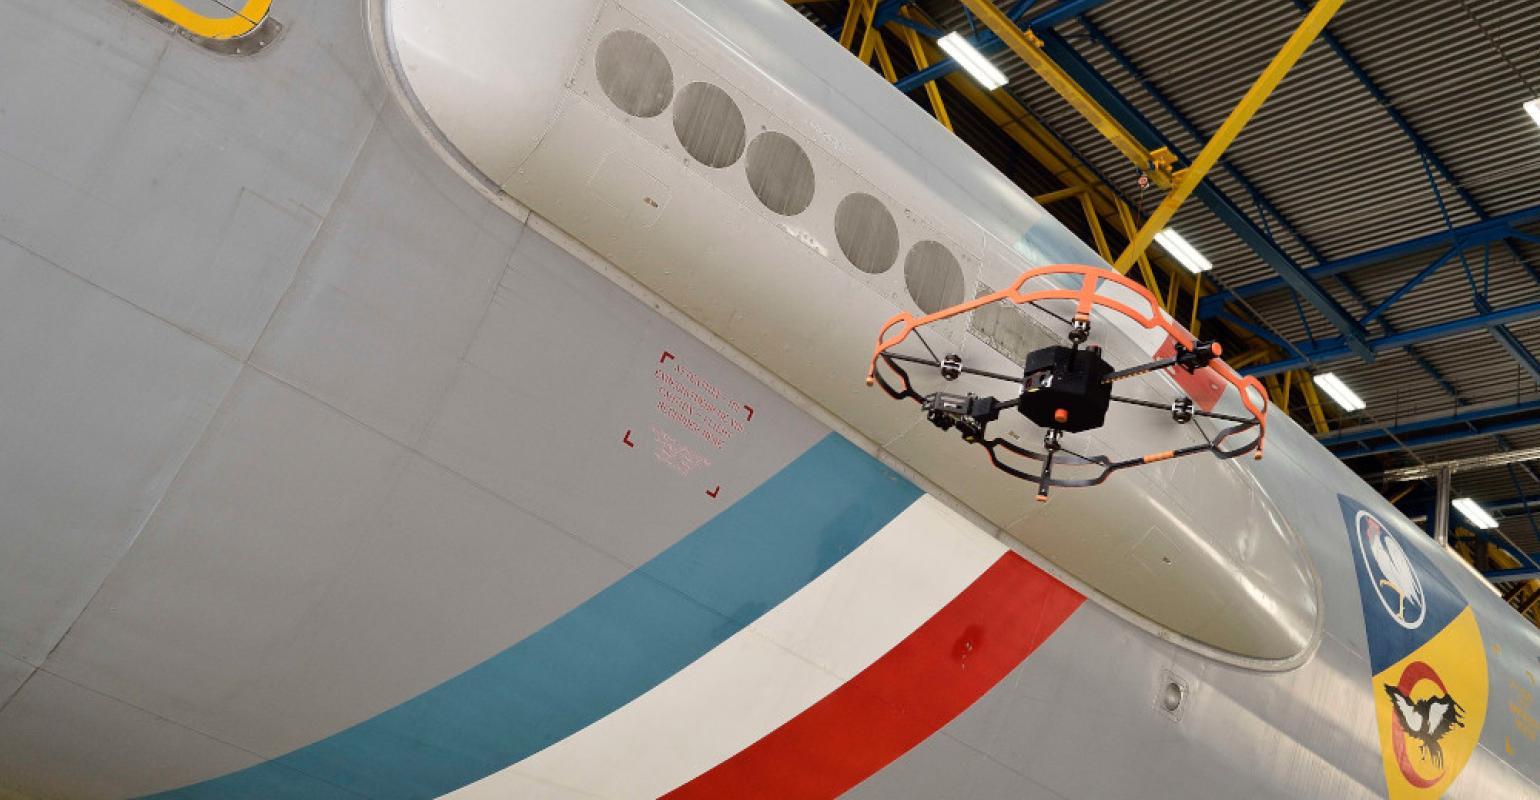 Drone tested at AFI KLM E&M